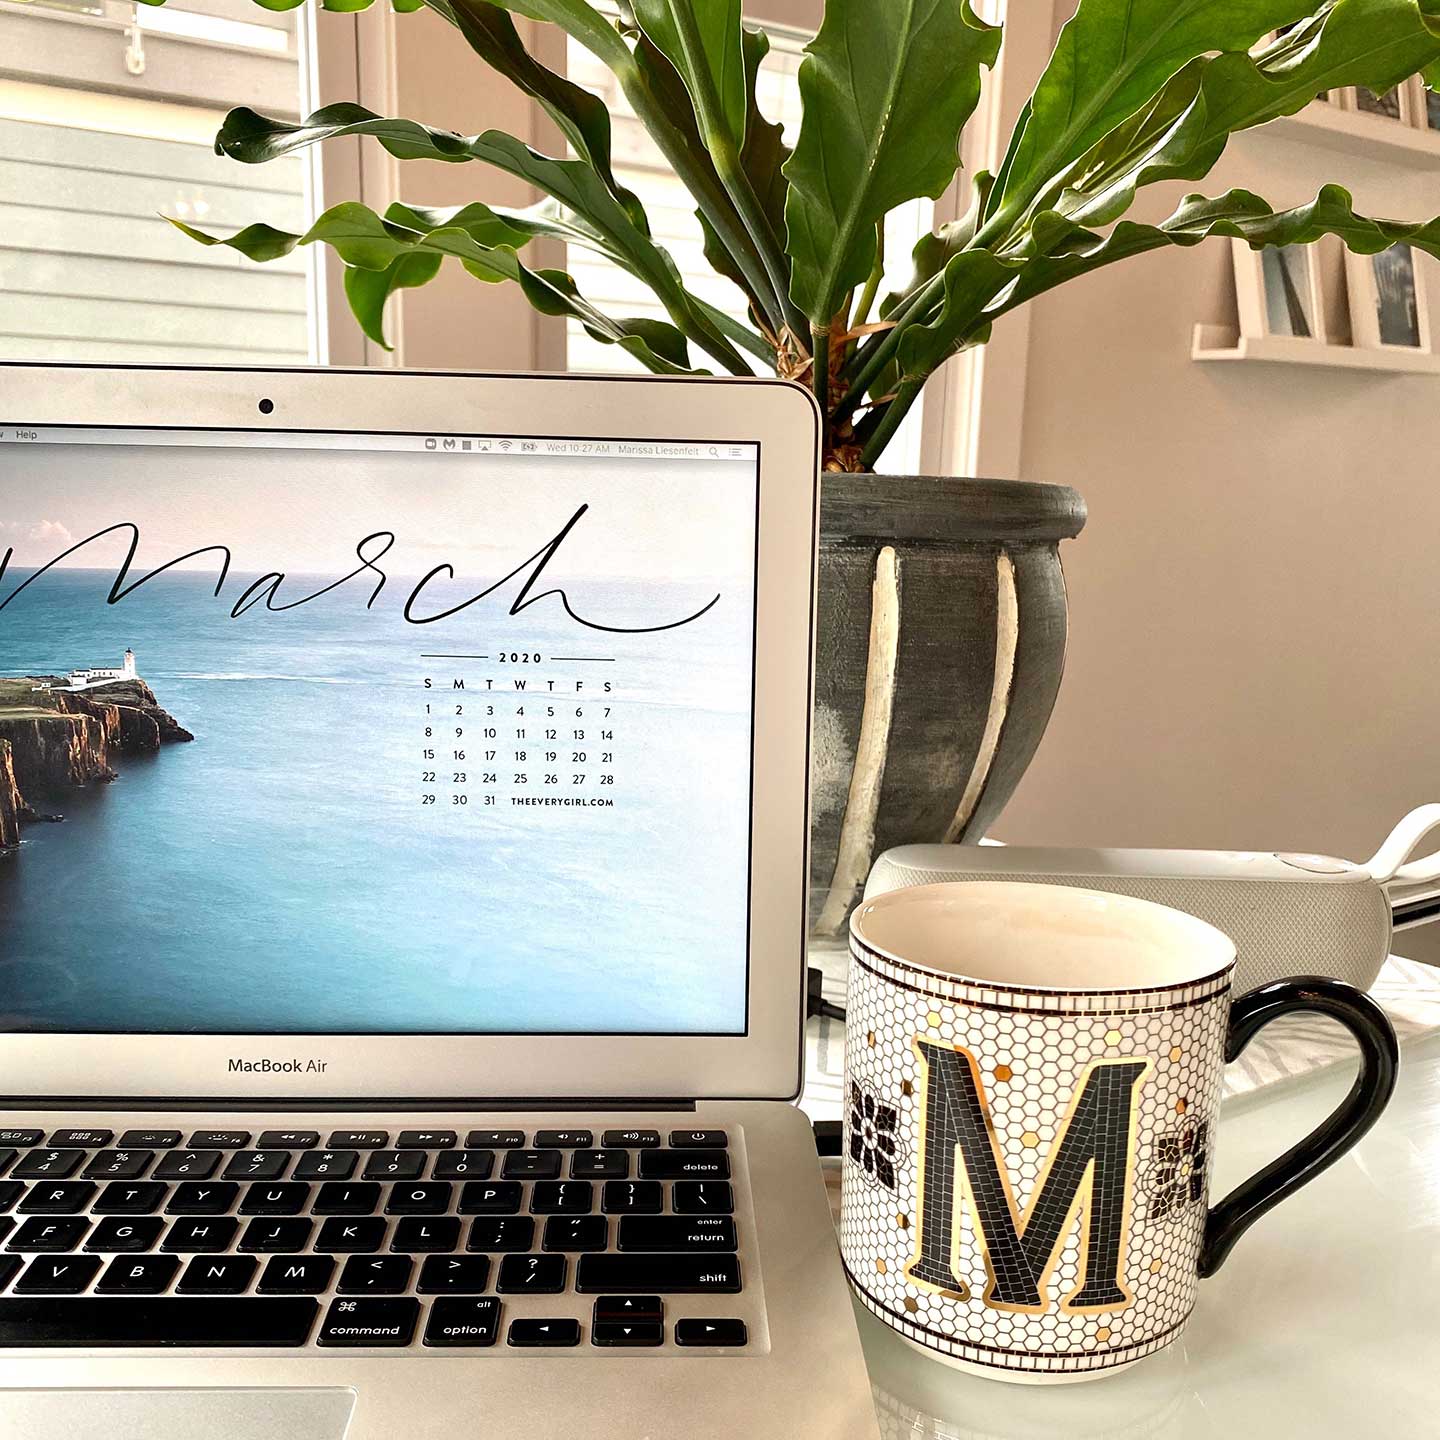 WFH March 2020 Laptop and Mug with an M